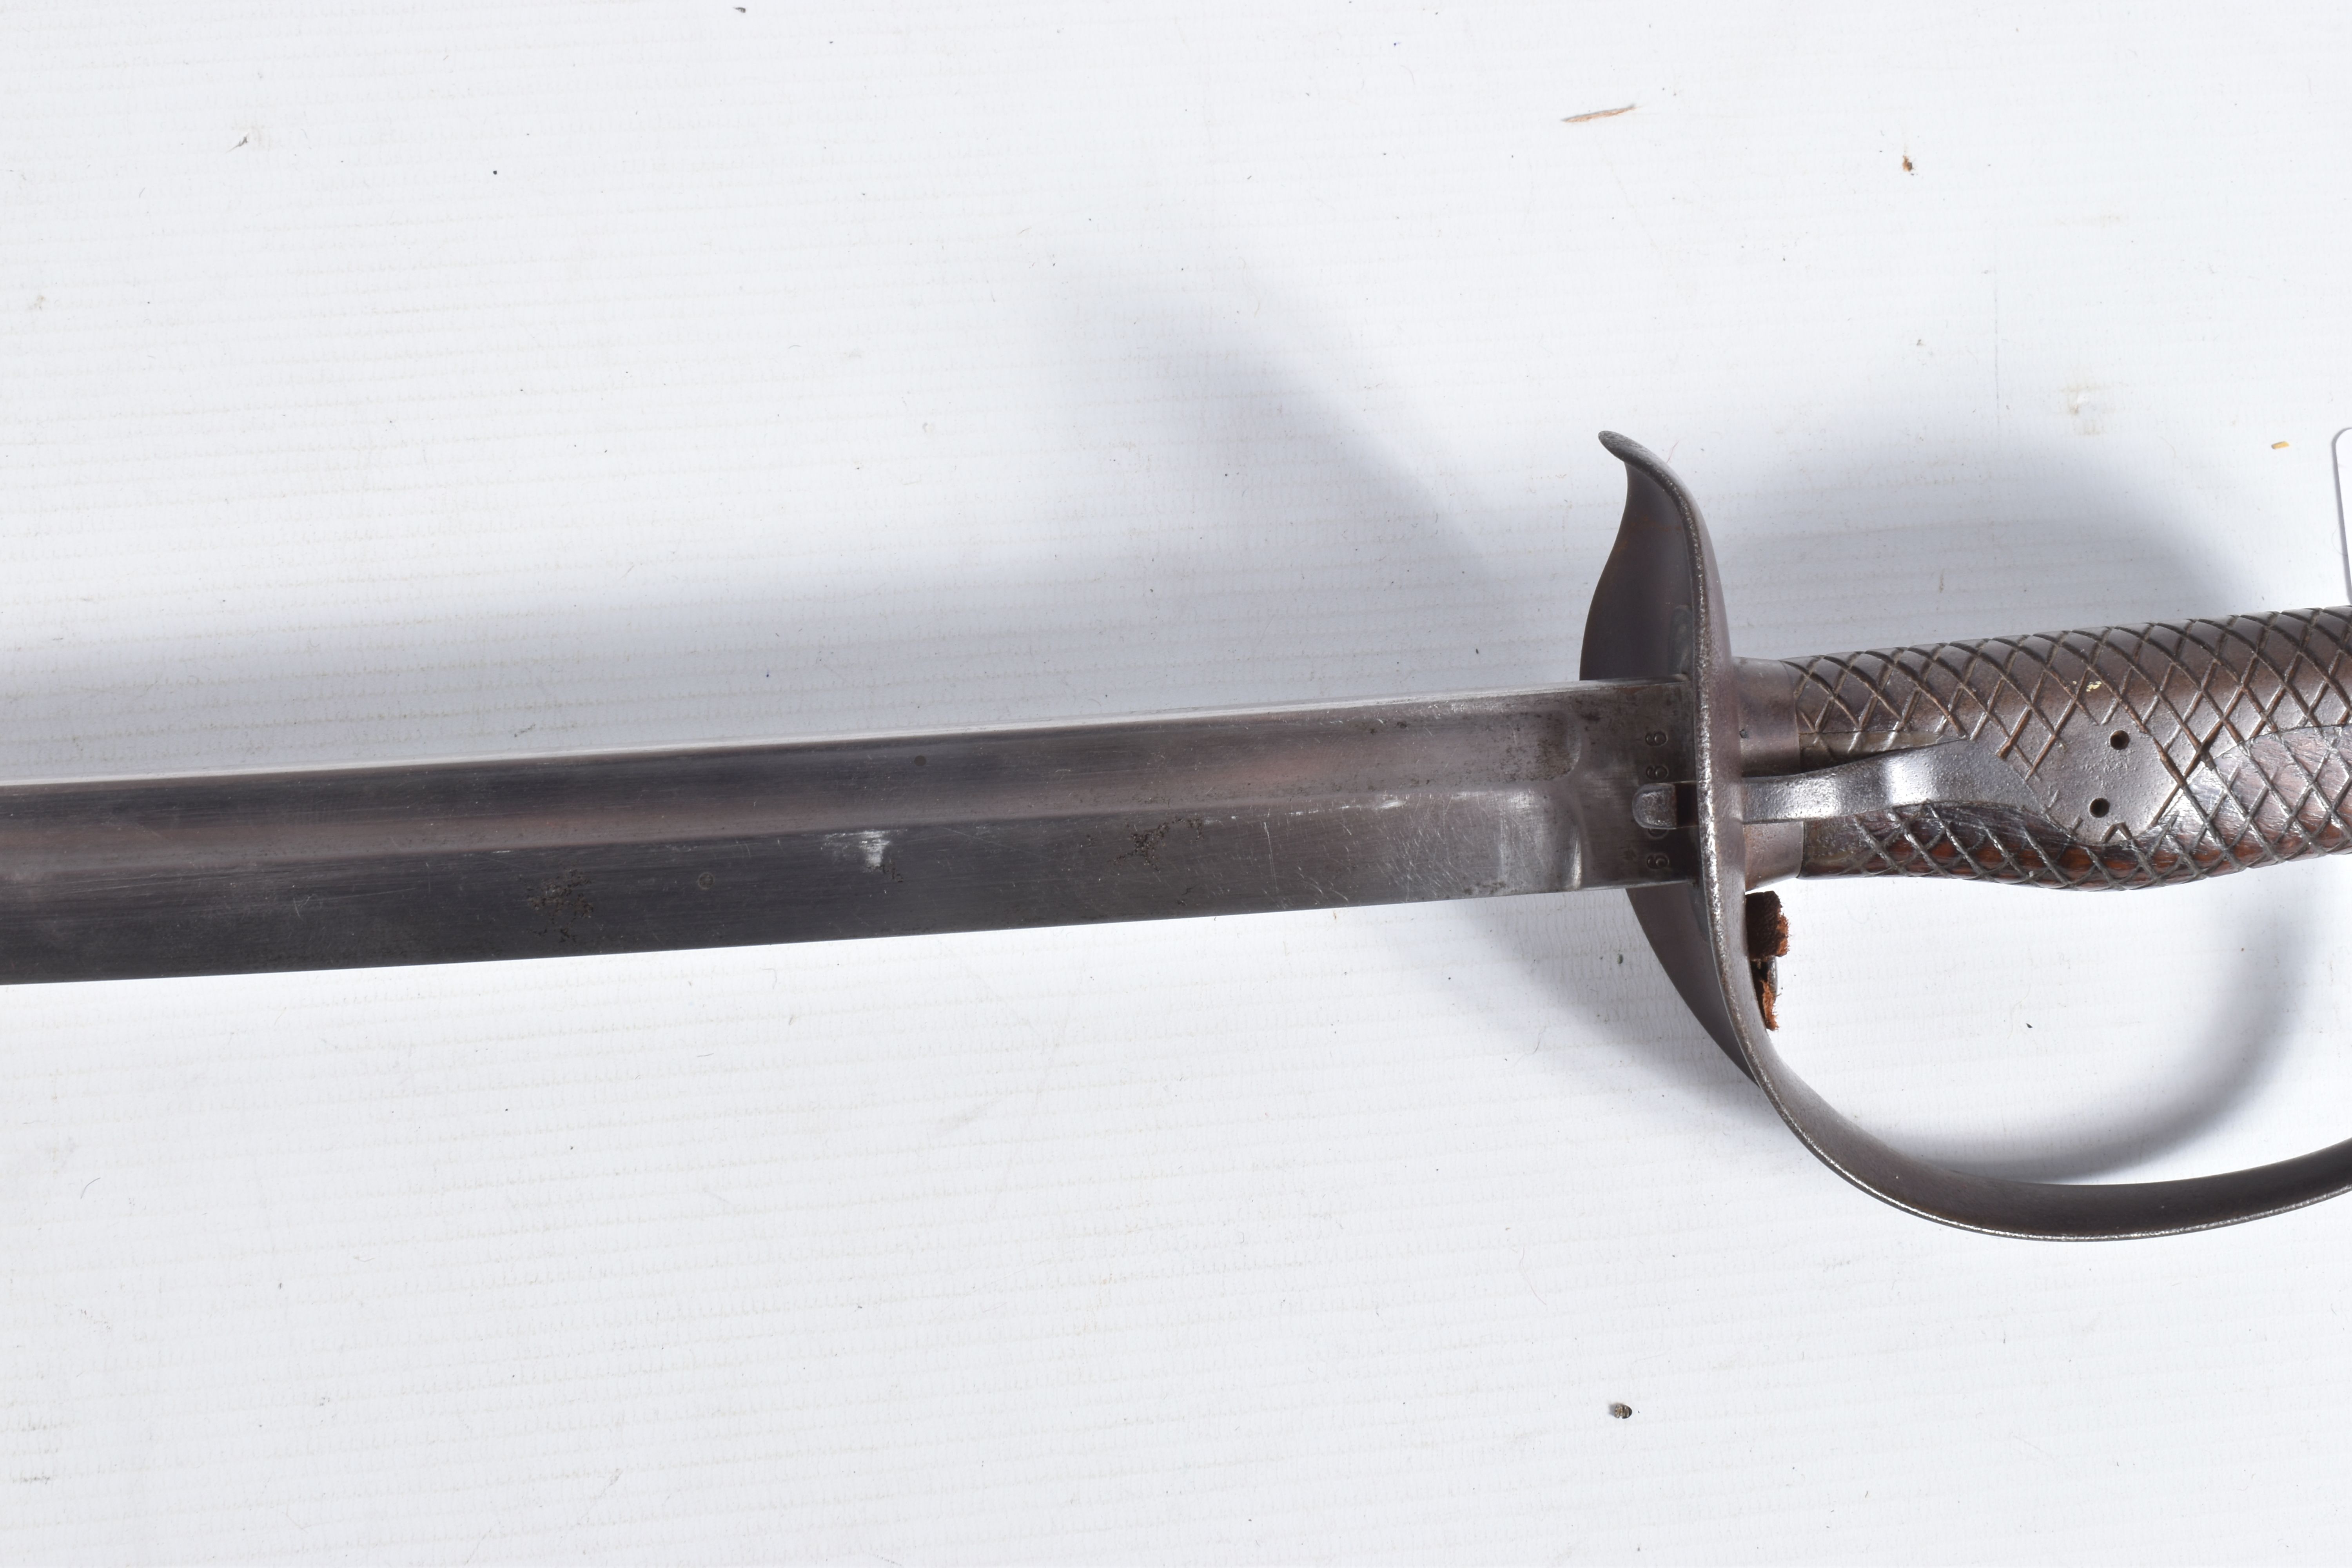 A JAPANESE TYPE 32 OTSU SABRE, the blade has no markings but has the serial number 60866 at the - Image 16 of 29